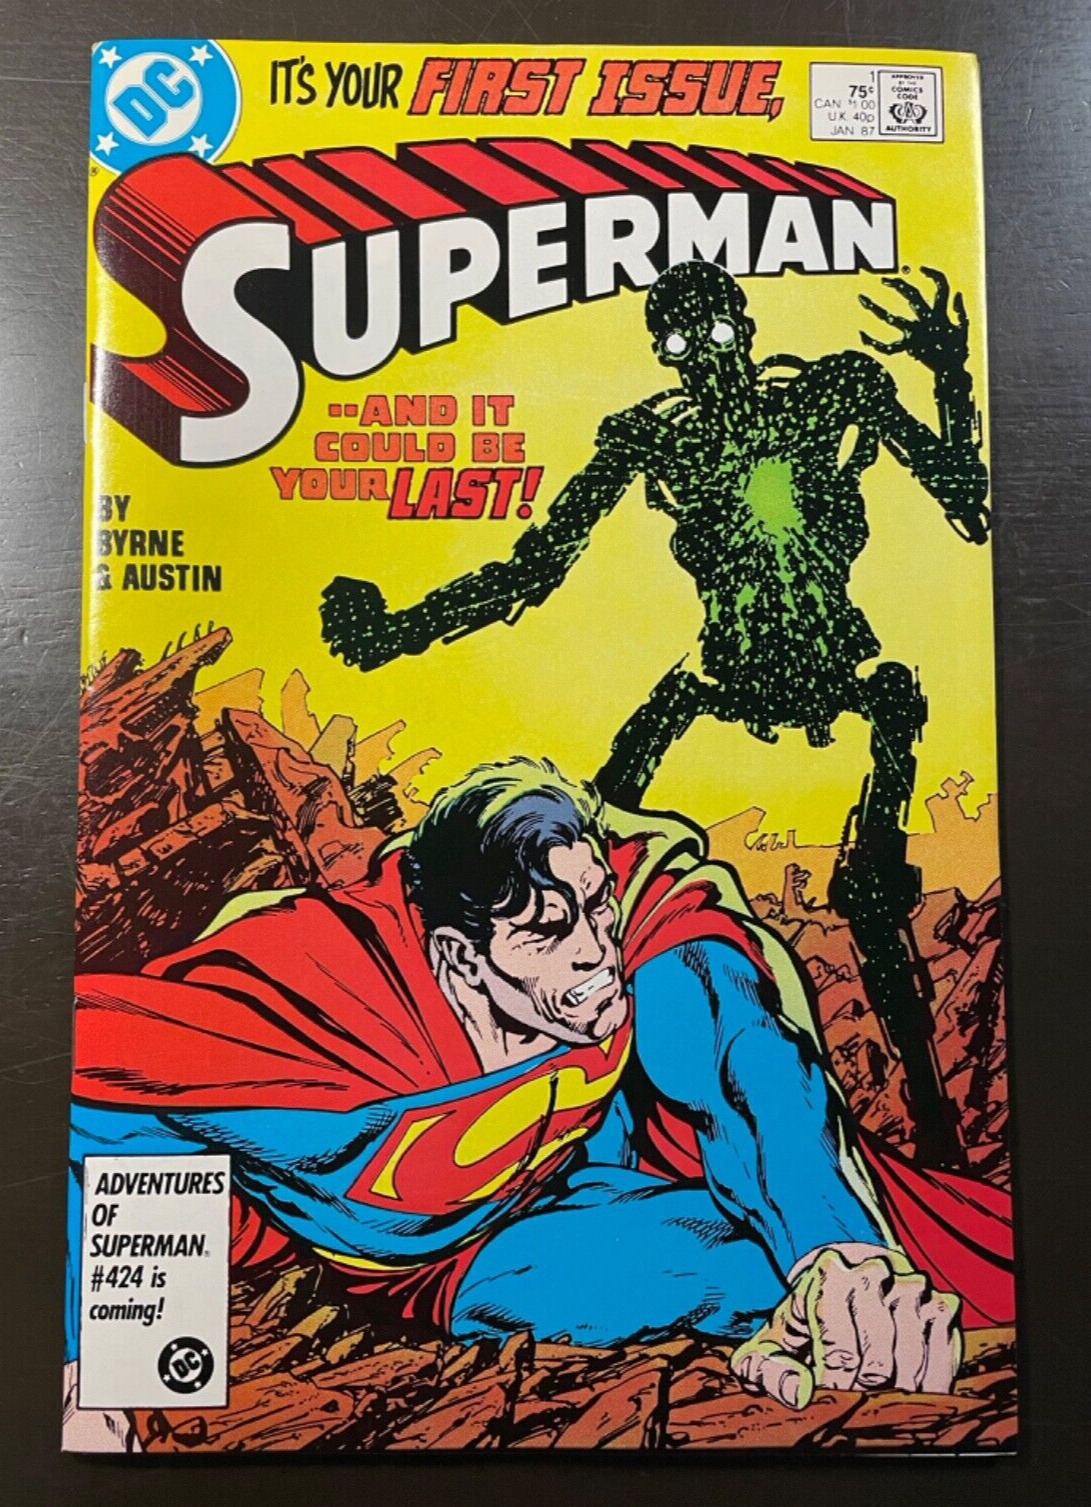 Vintage Comic Book SUPERMAN #1 DC Comics Awesome Cover Art Bagged and Boarded